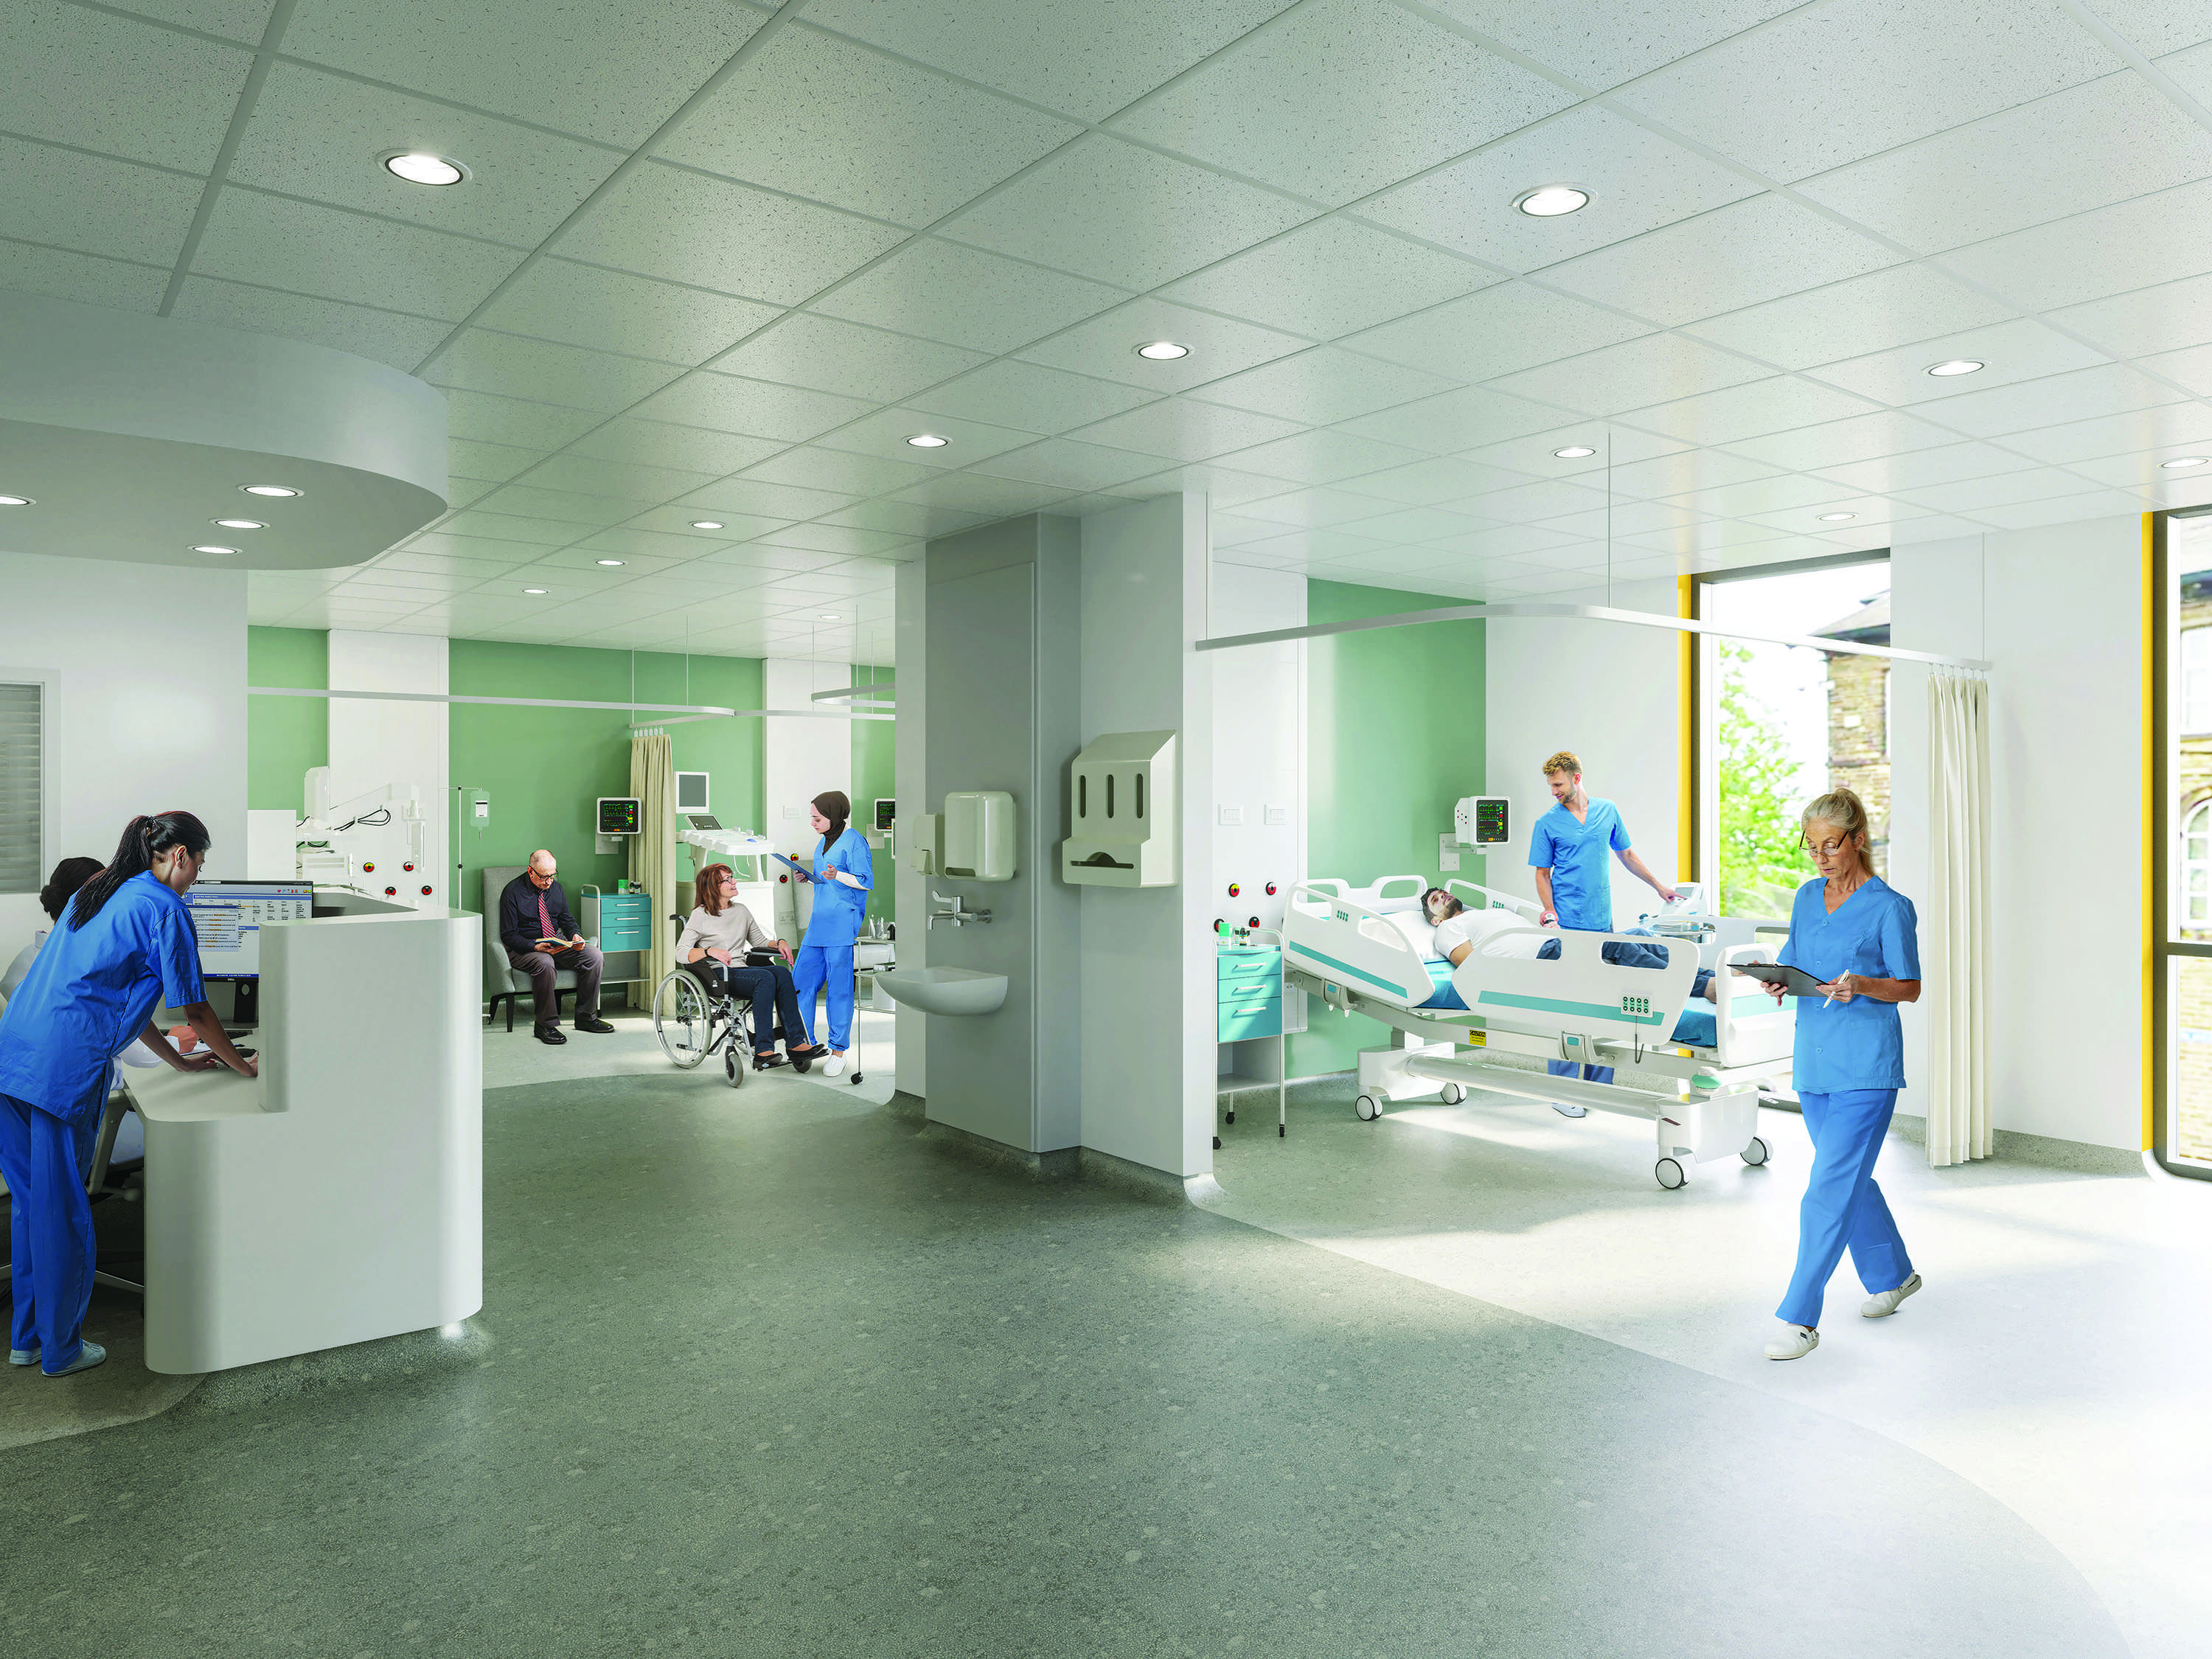 A computer rendered artist's impression of how the inside of the new building may look. There are large windows and light walls, with a number of clinicians in blue scrubs, as well as patients receiving treatment.